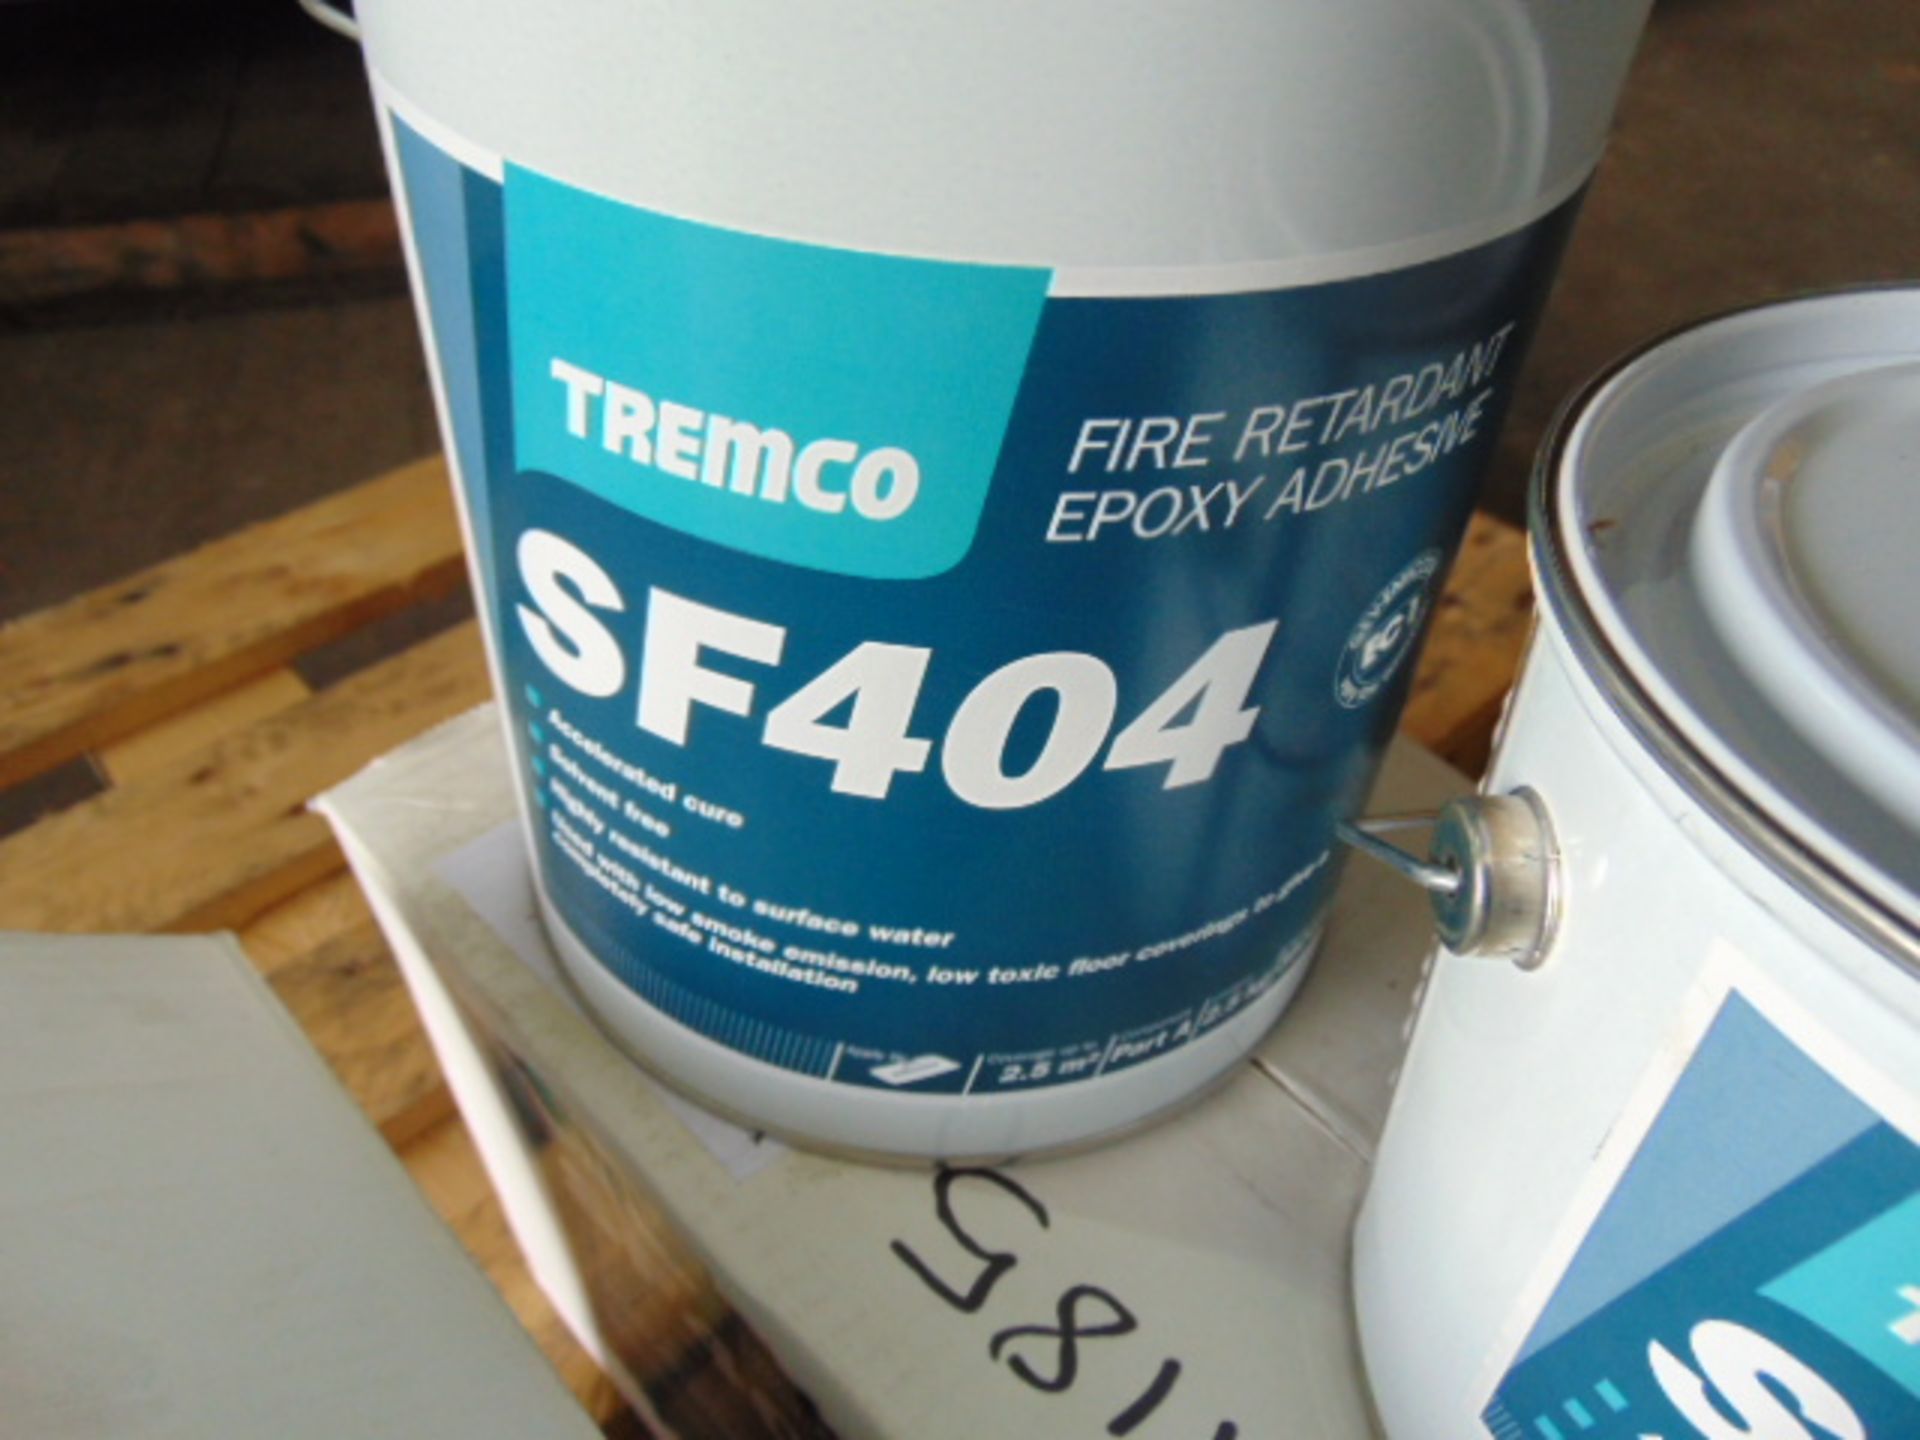 Qty 2 x Tremco SF404 Fire Retardant Epoxy Adhesive Direct from Reserve Stores - Image 2 of 3